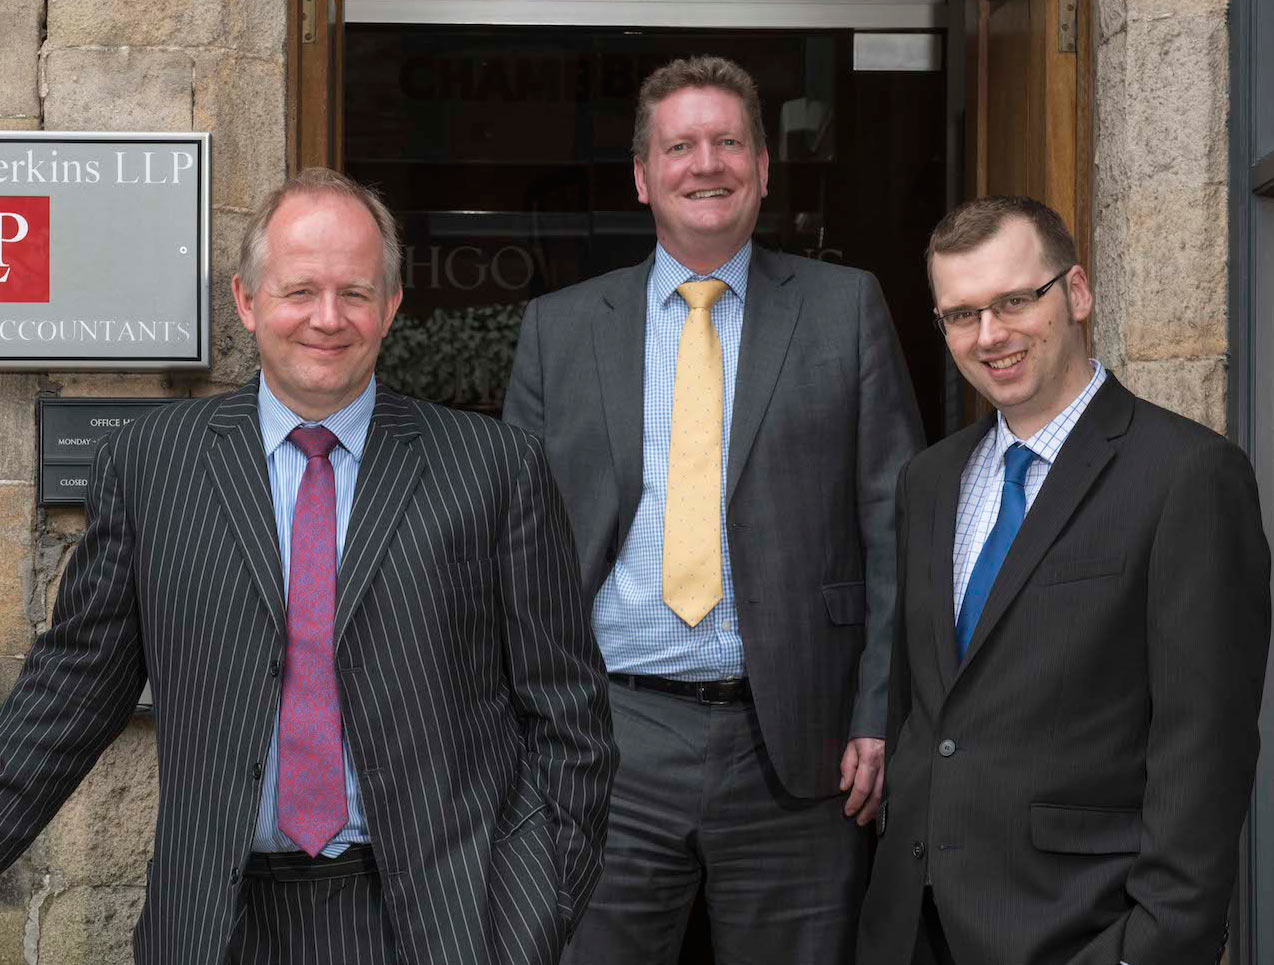 Lithgow Perkins has launched a new probate company, LP Probate Services Ltd. Robert Horner, left, and Joe Taylor, right, are pictured with fellow partner Mike Briggs